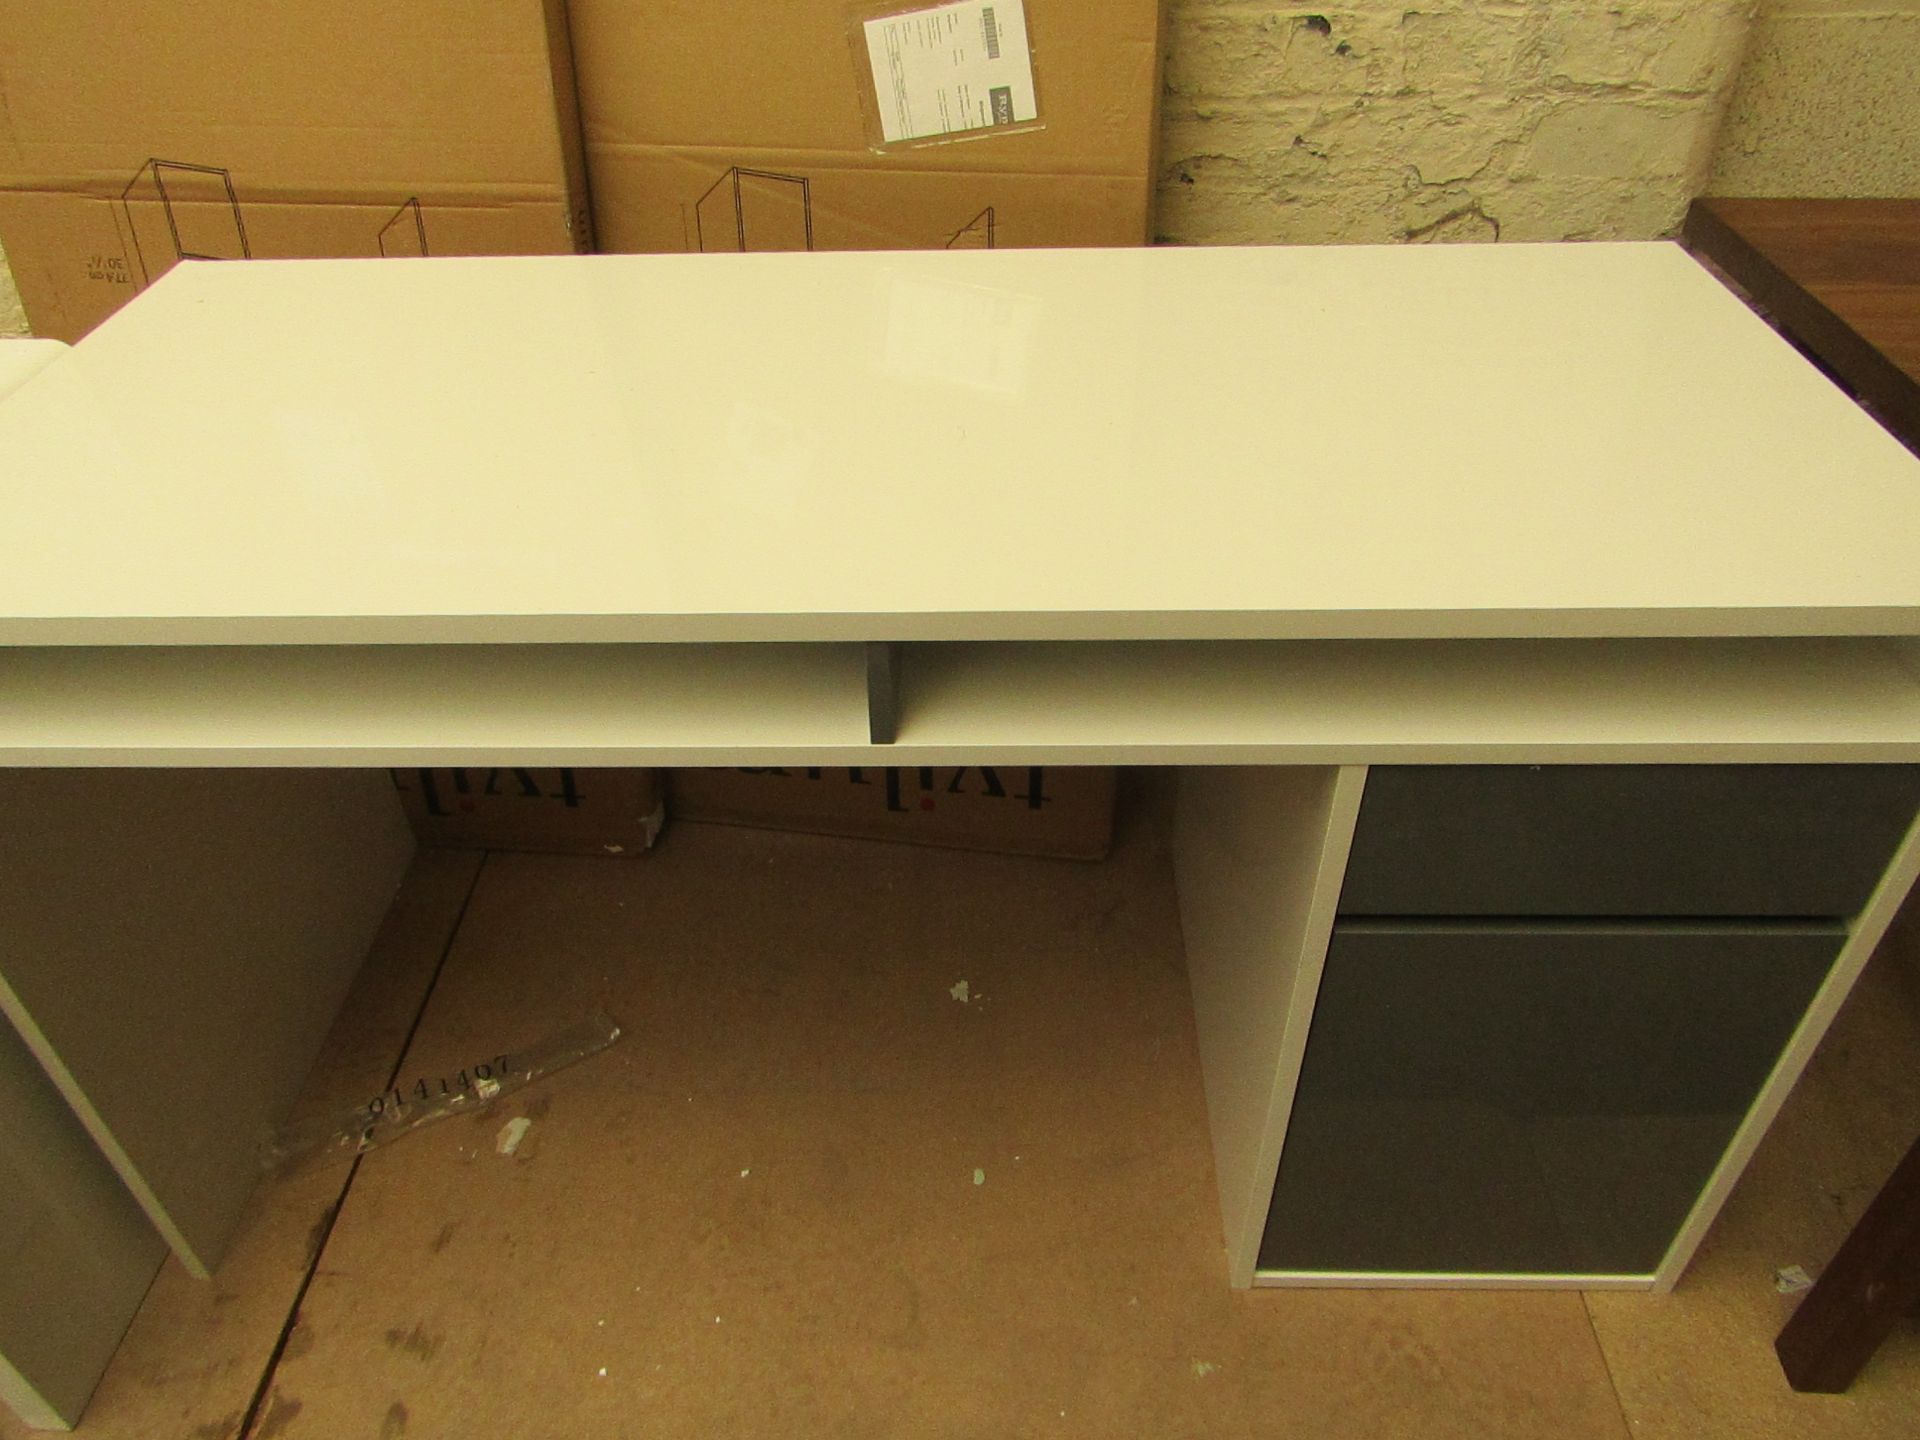 TVilum Gloss white and grey office desk 1.4mtr long x 60cm deep, 77cm tall 50kg, please note this